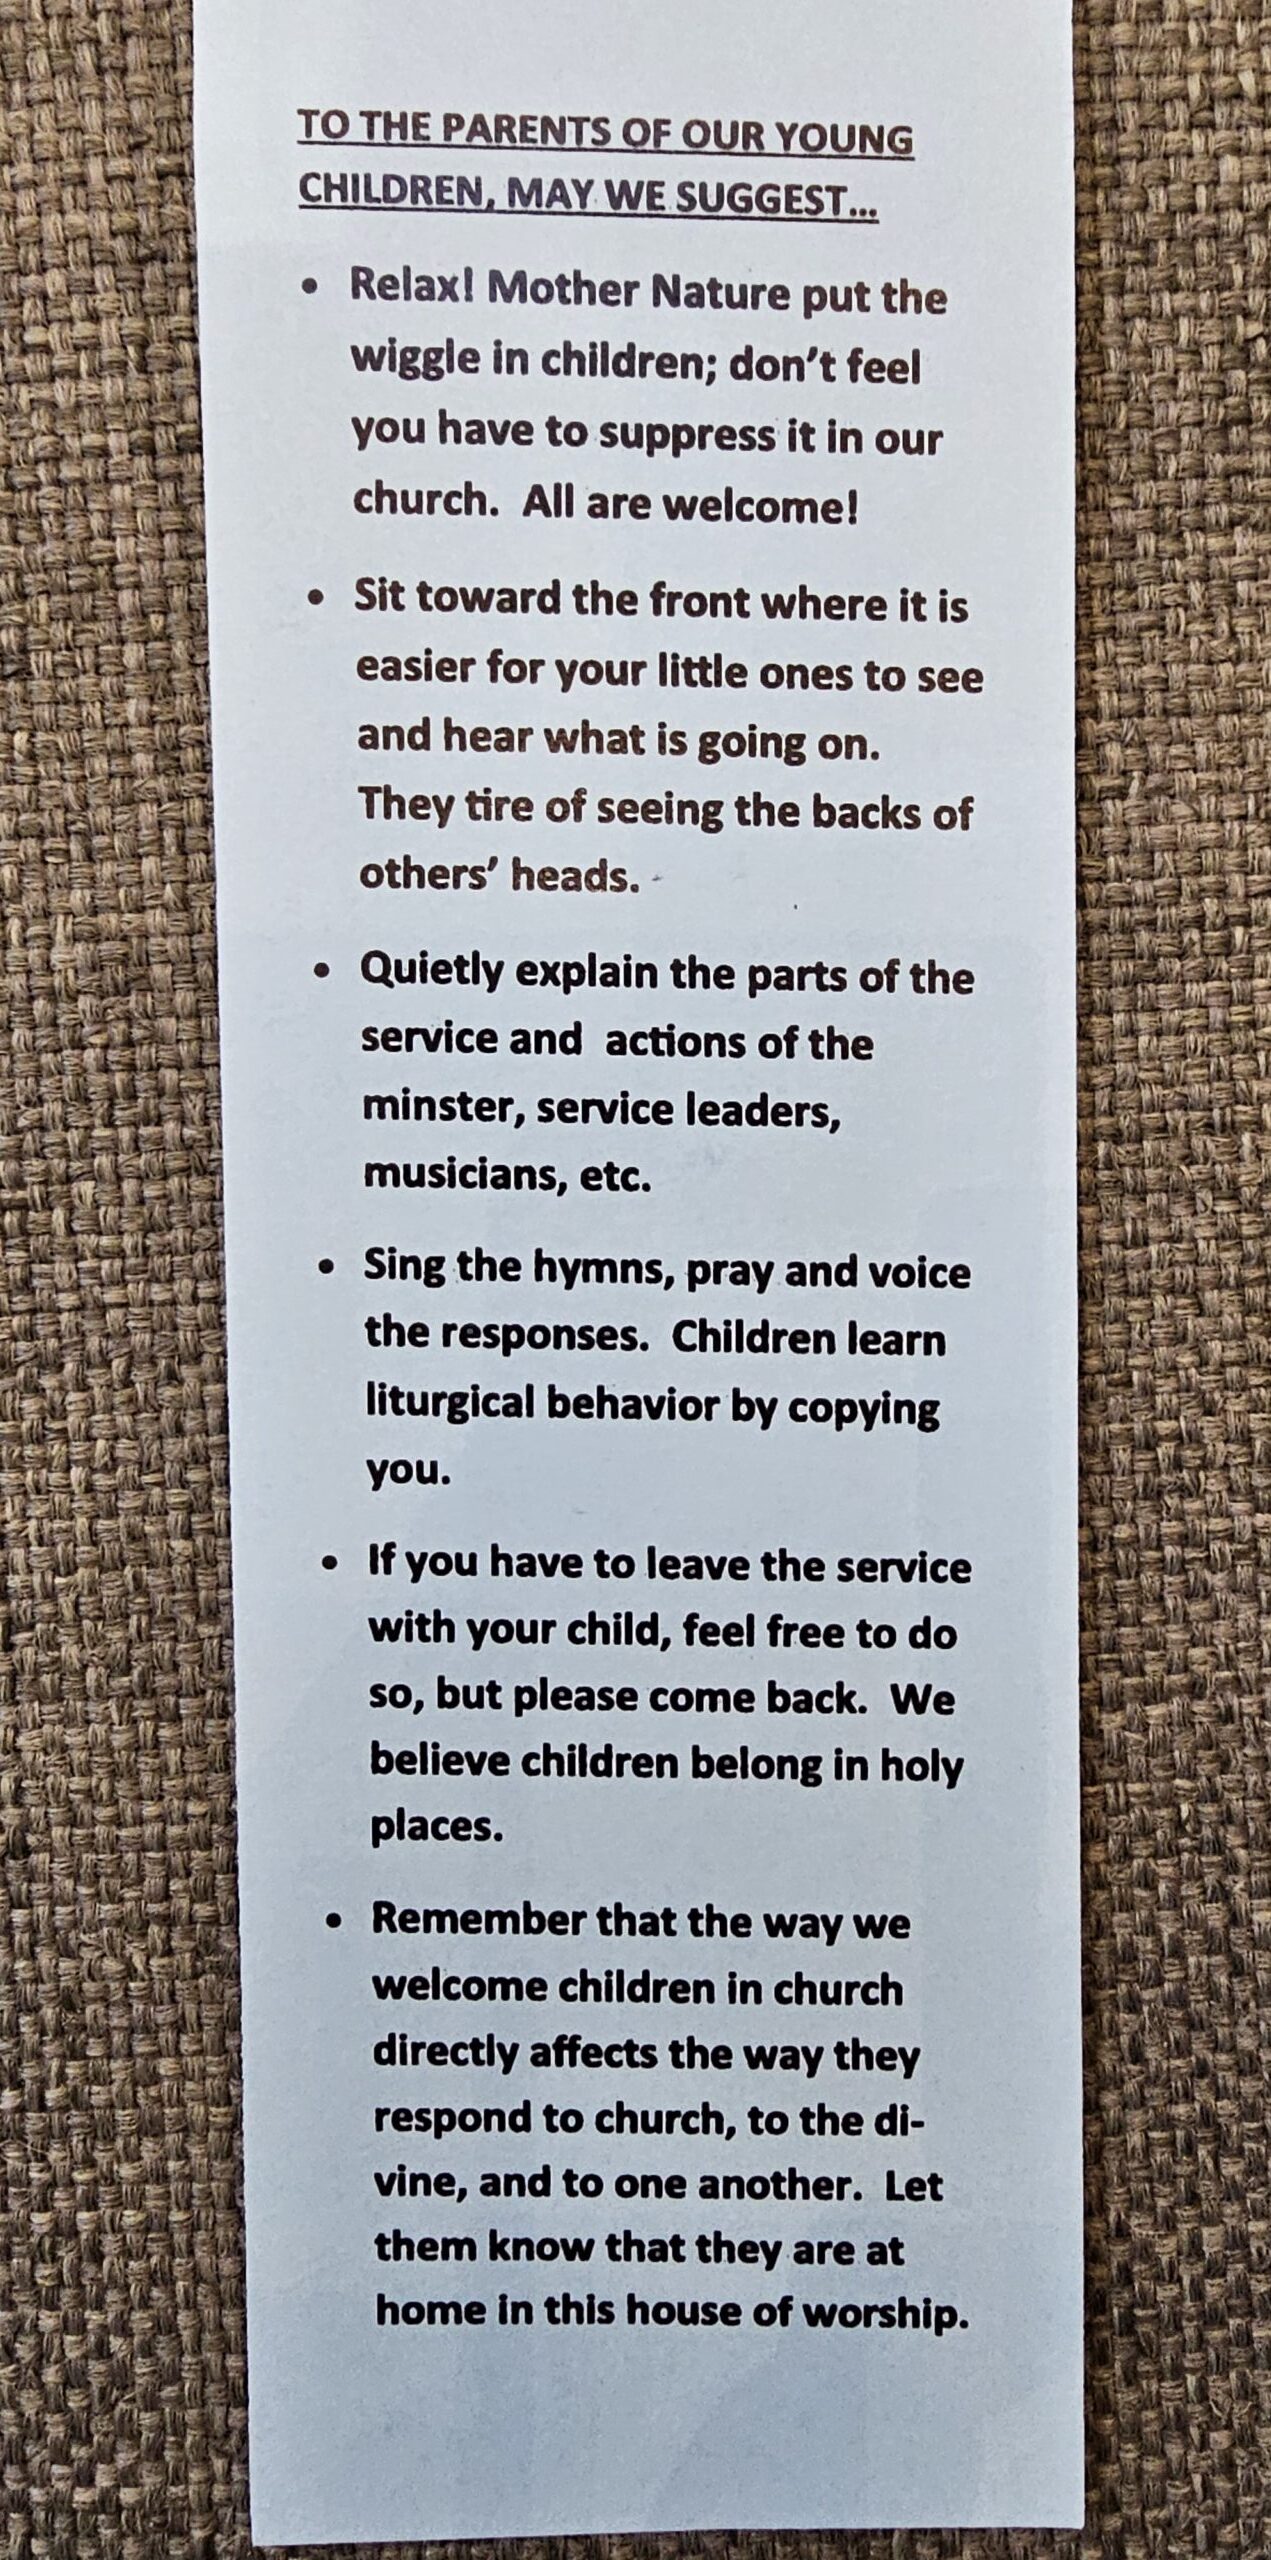 A leaflet from our hymnals describing the ways we want parents and children to feel welcome.